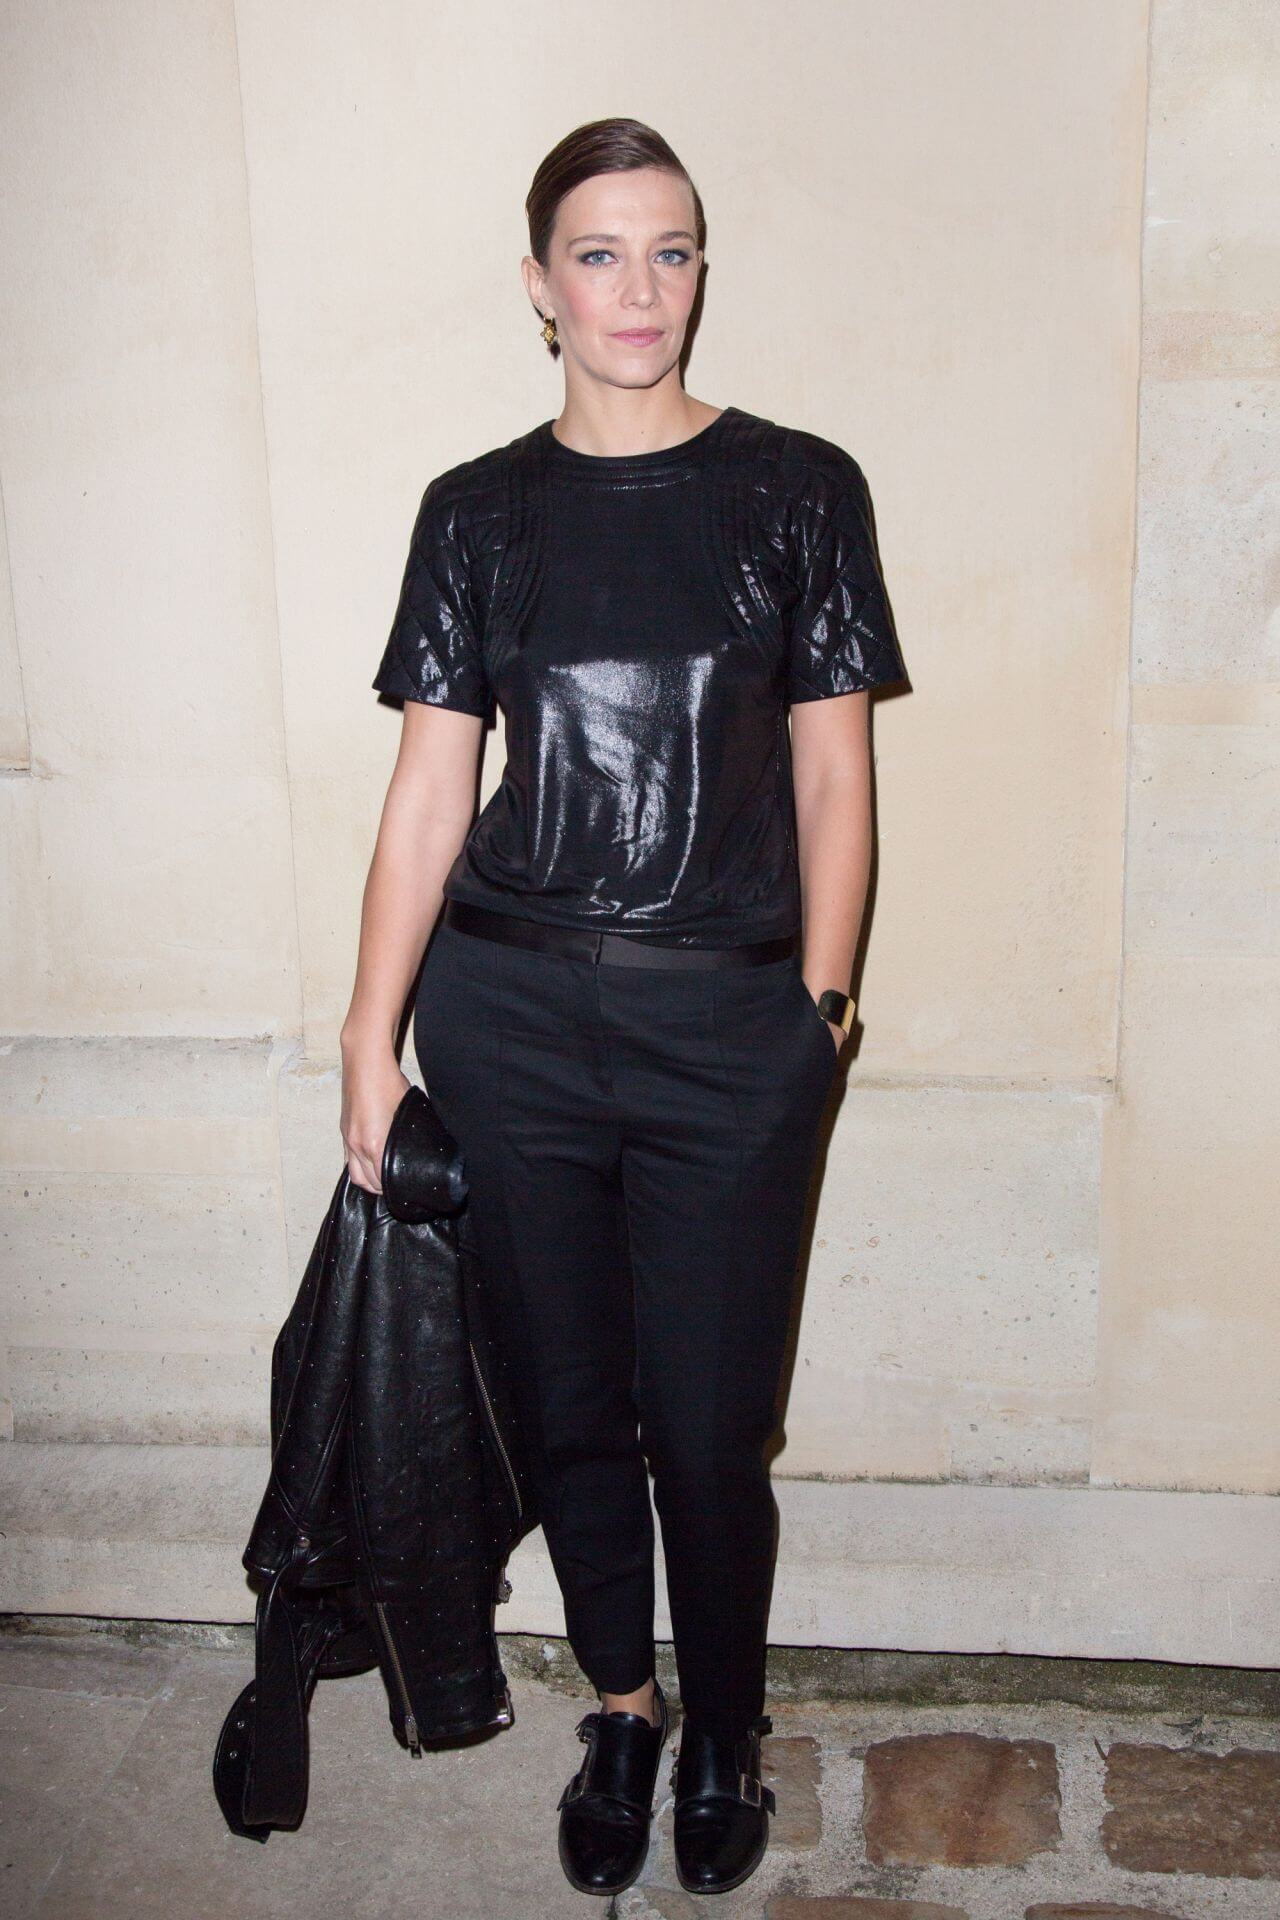 Céline Sallette In Black Leather Top With Pants At  Chanel “Code Coco” Watch Launch Party in Paris